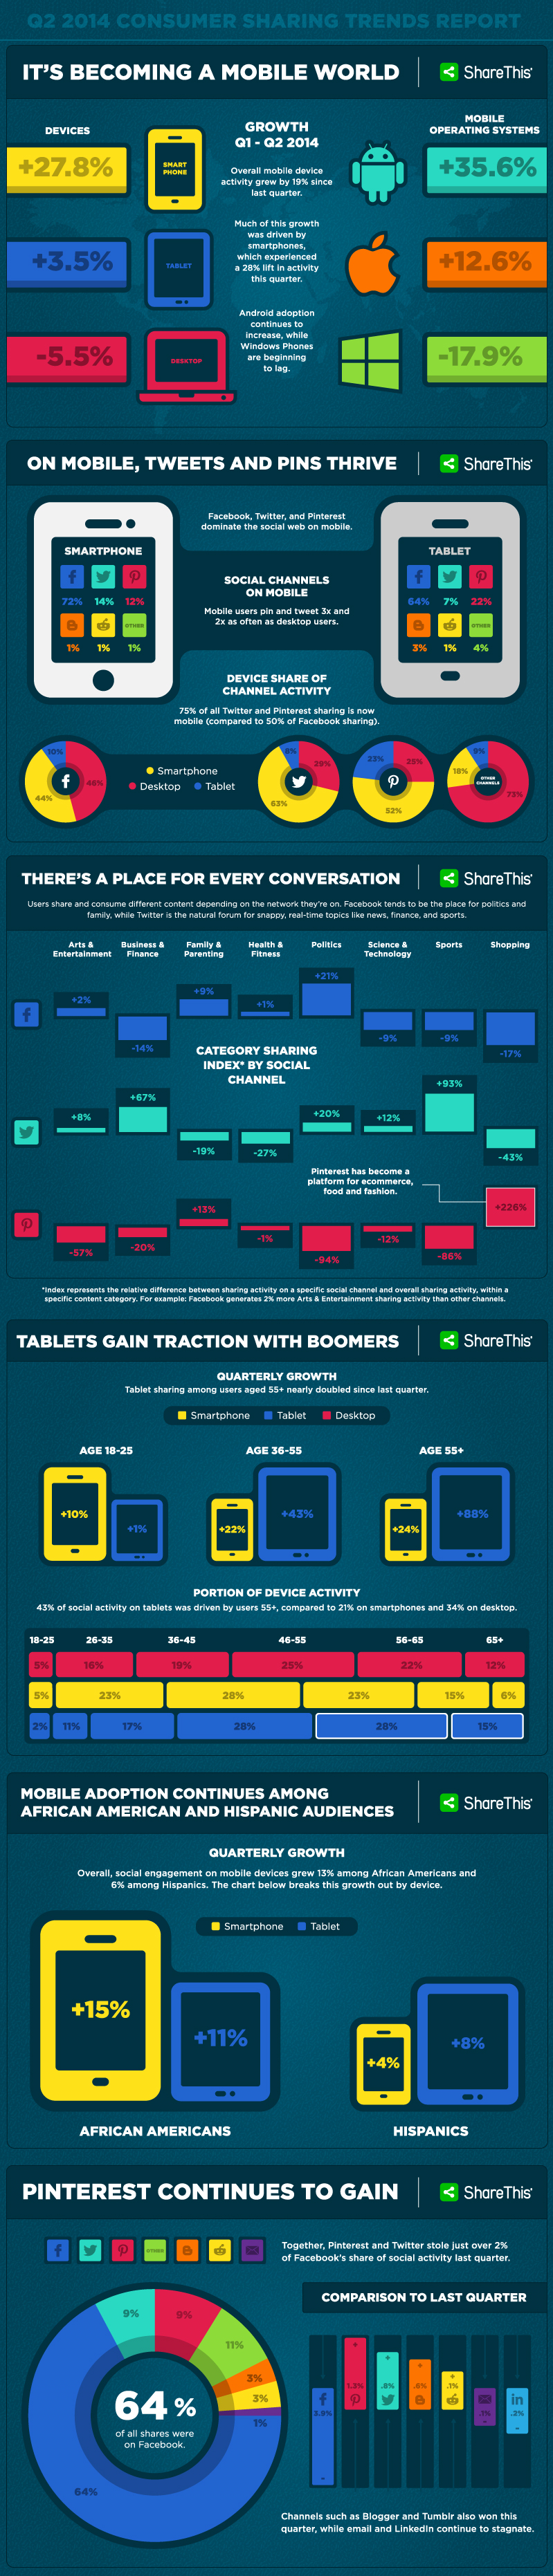 mobile-sharing-growth-continues-pinterest-twitter-leading-way-infographic-consumer-social-media-sharing-trends-2014